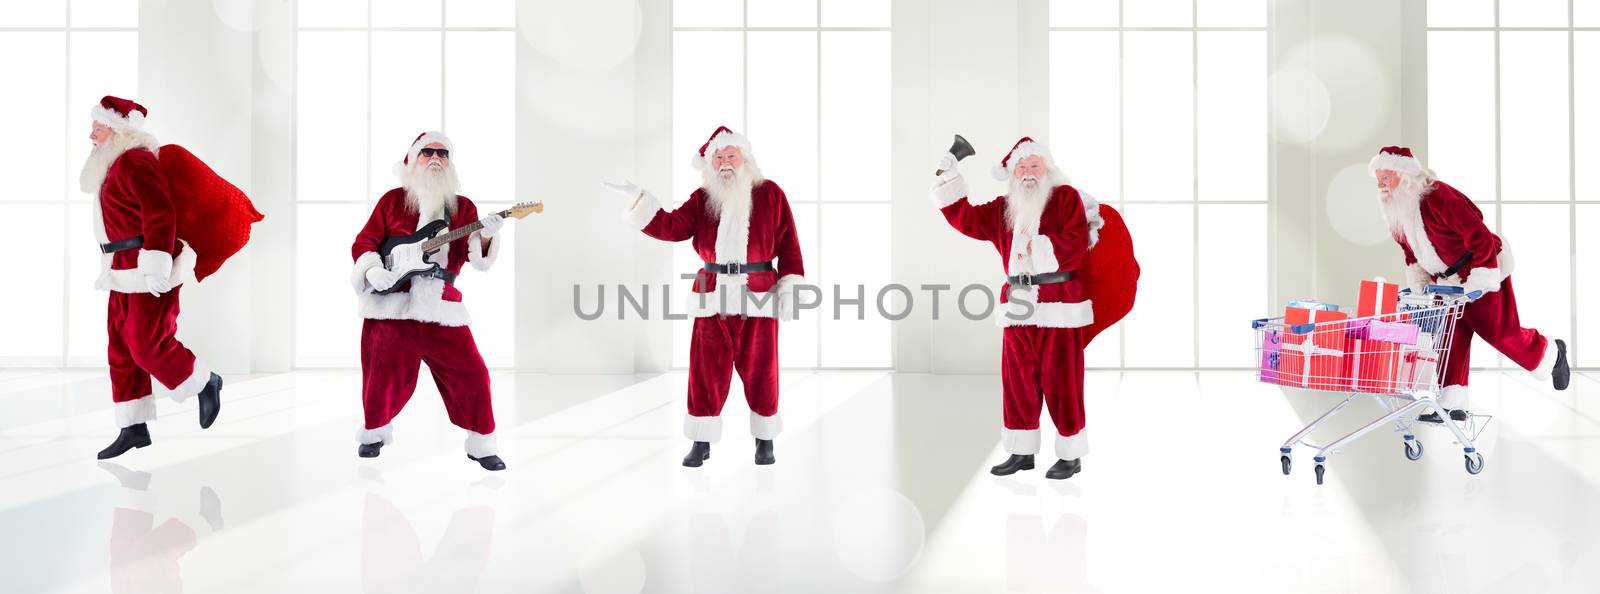 Composite image of different santas against twinkling lights over room with windows